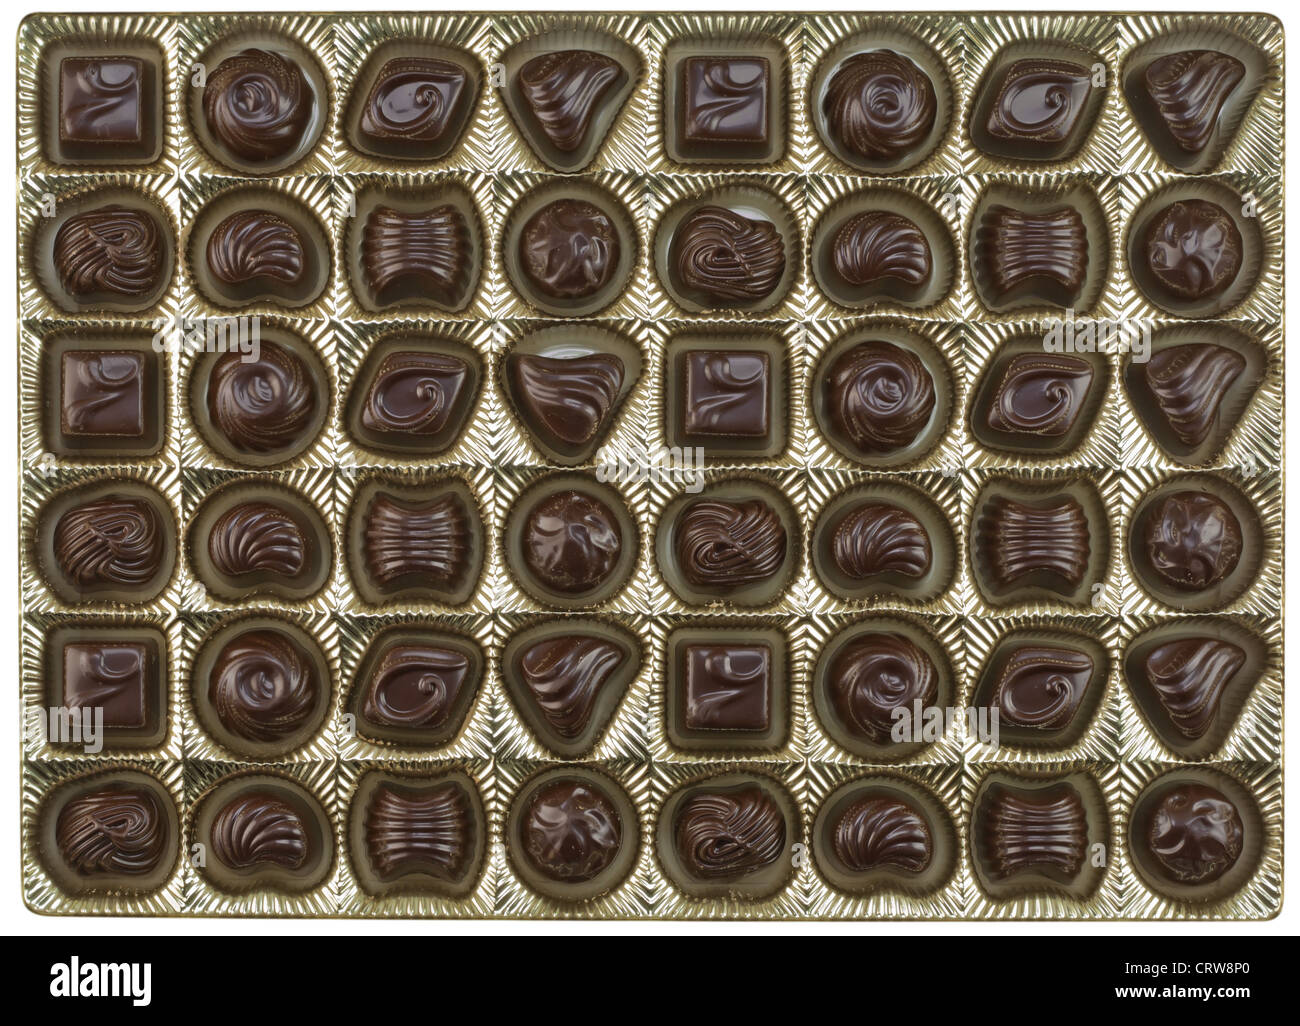 Chocolates with a various stuffing background Stock Photo